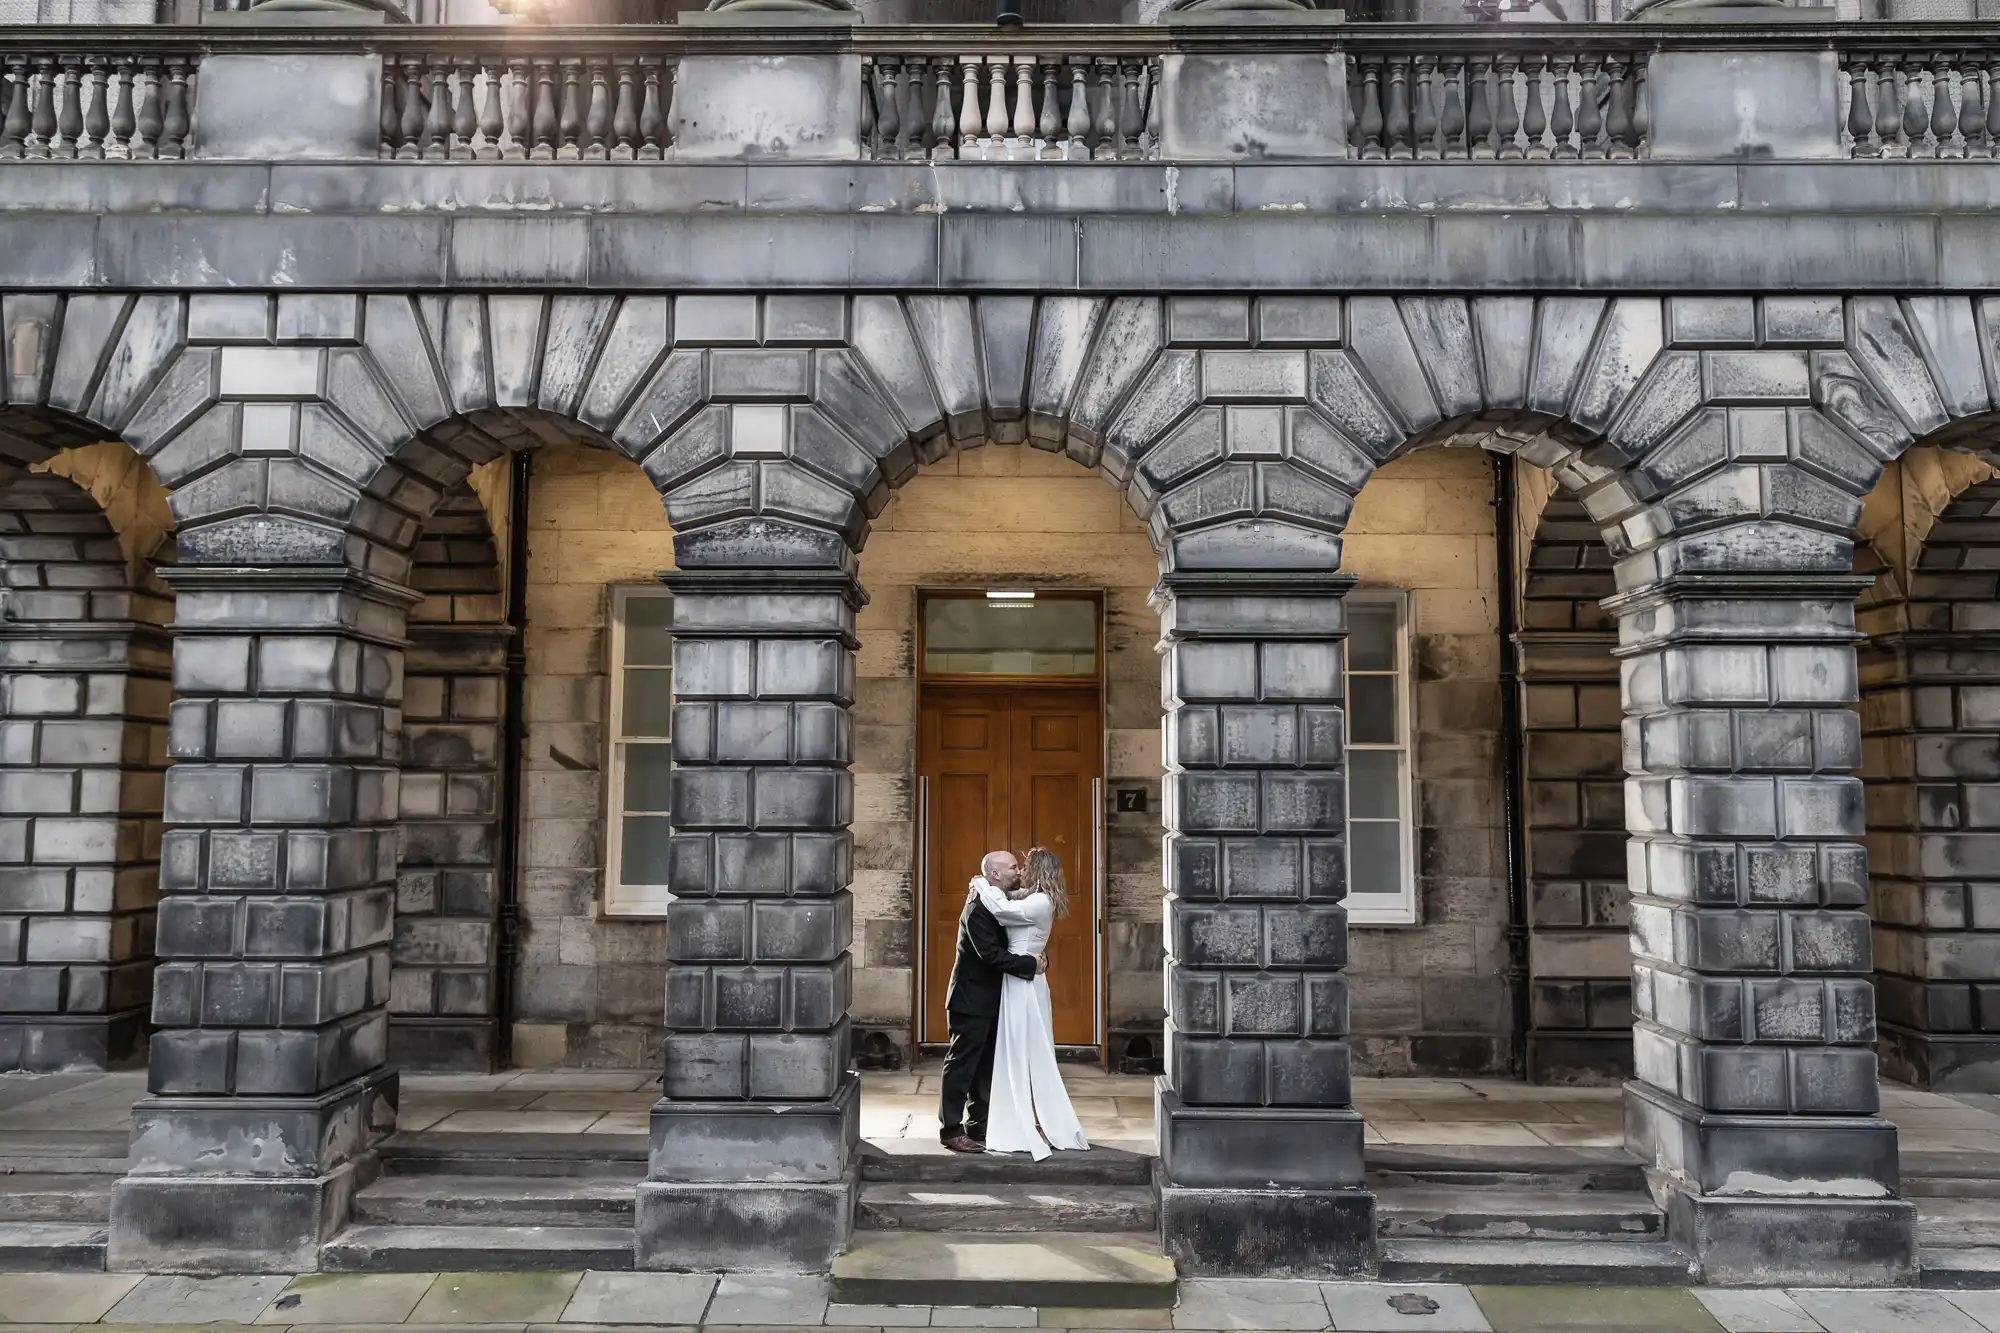 A couple dressed in wedding attire embraces under the archways of a historic stone building.